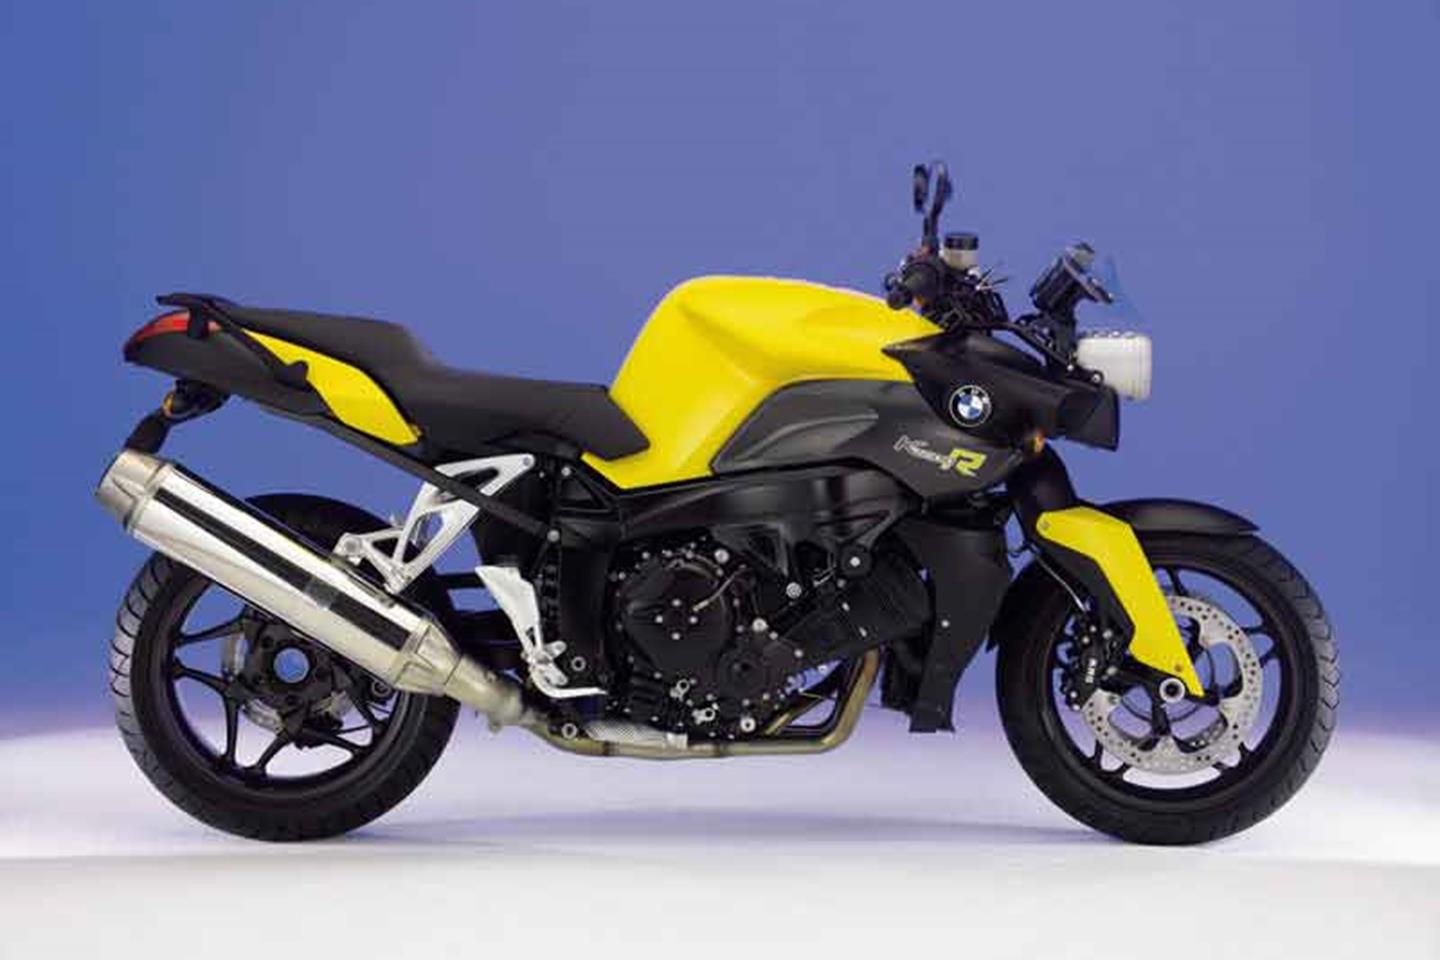 BMW K1200R (2005-2008) Review | Speed, Specs & Prices